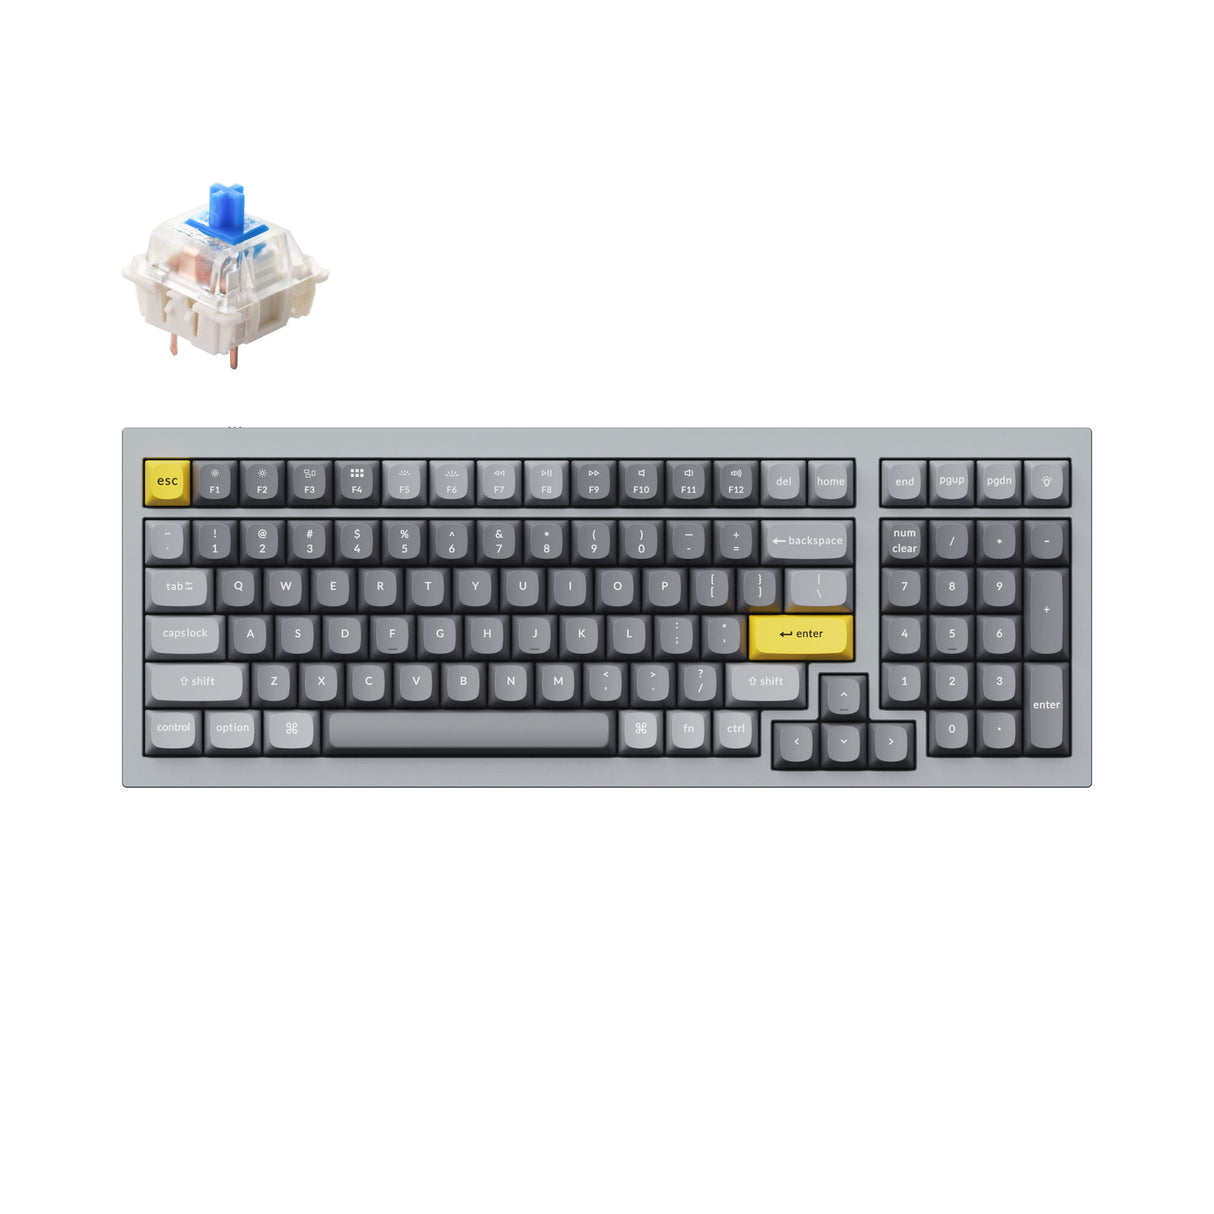 Keychron Q5 QMK VIA custom mechanical keyboard 1800 compact 96 percent layout full aluminum grey frame for Mac Windows RGB backlight with hot swappable Gateron G Pro switch blue